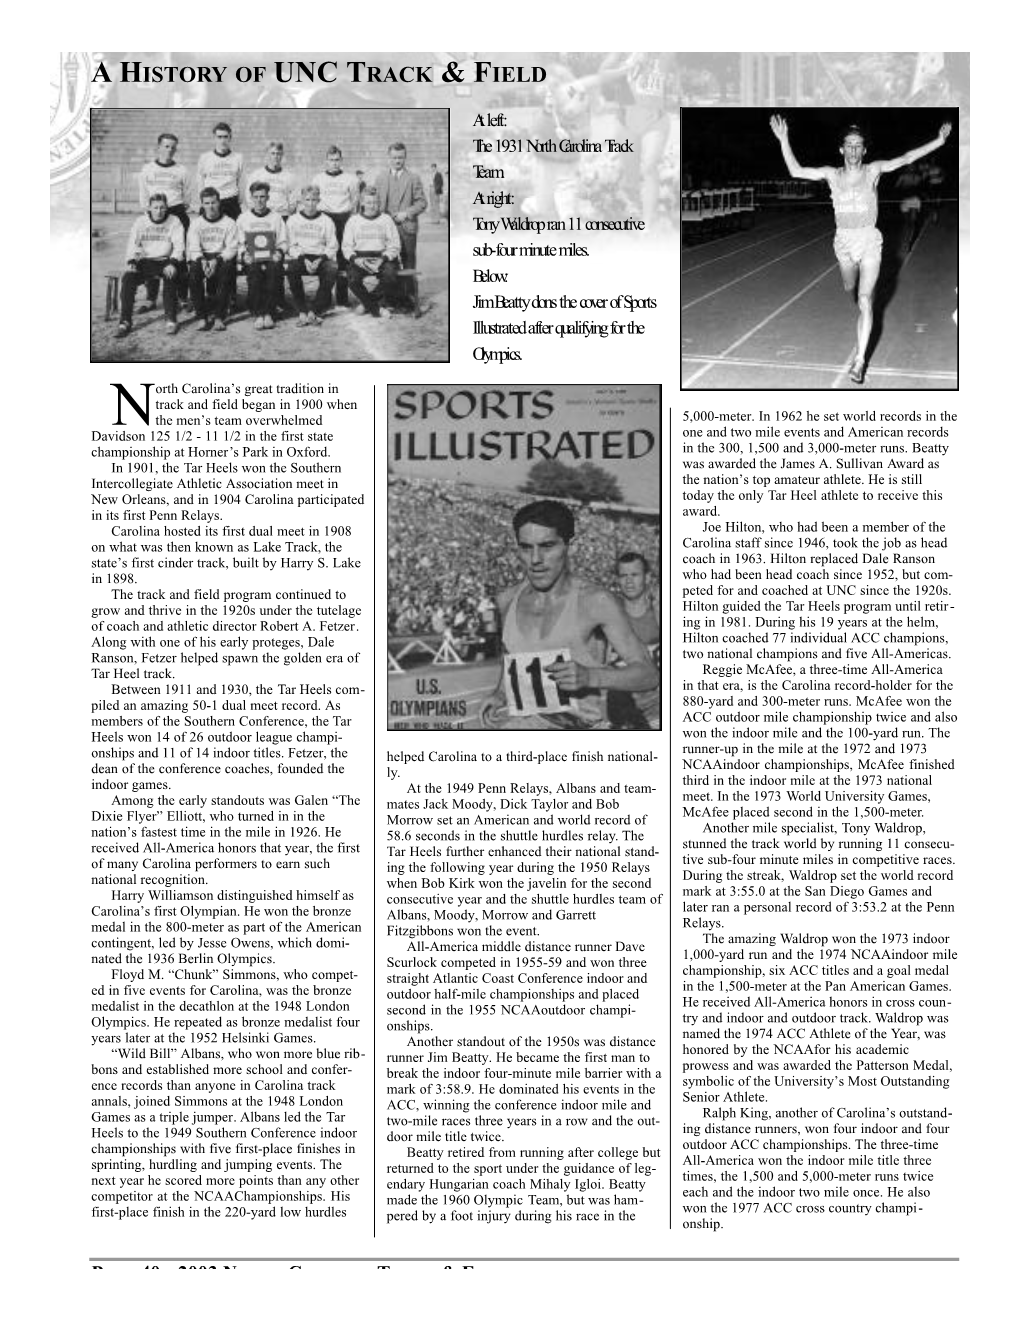 A History of Unc Track & Field